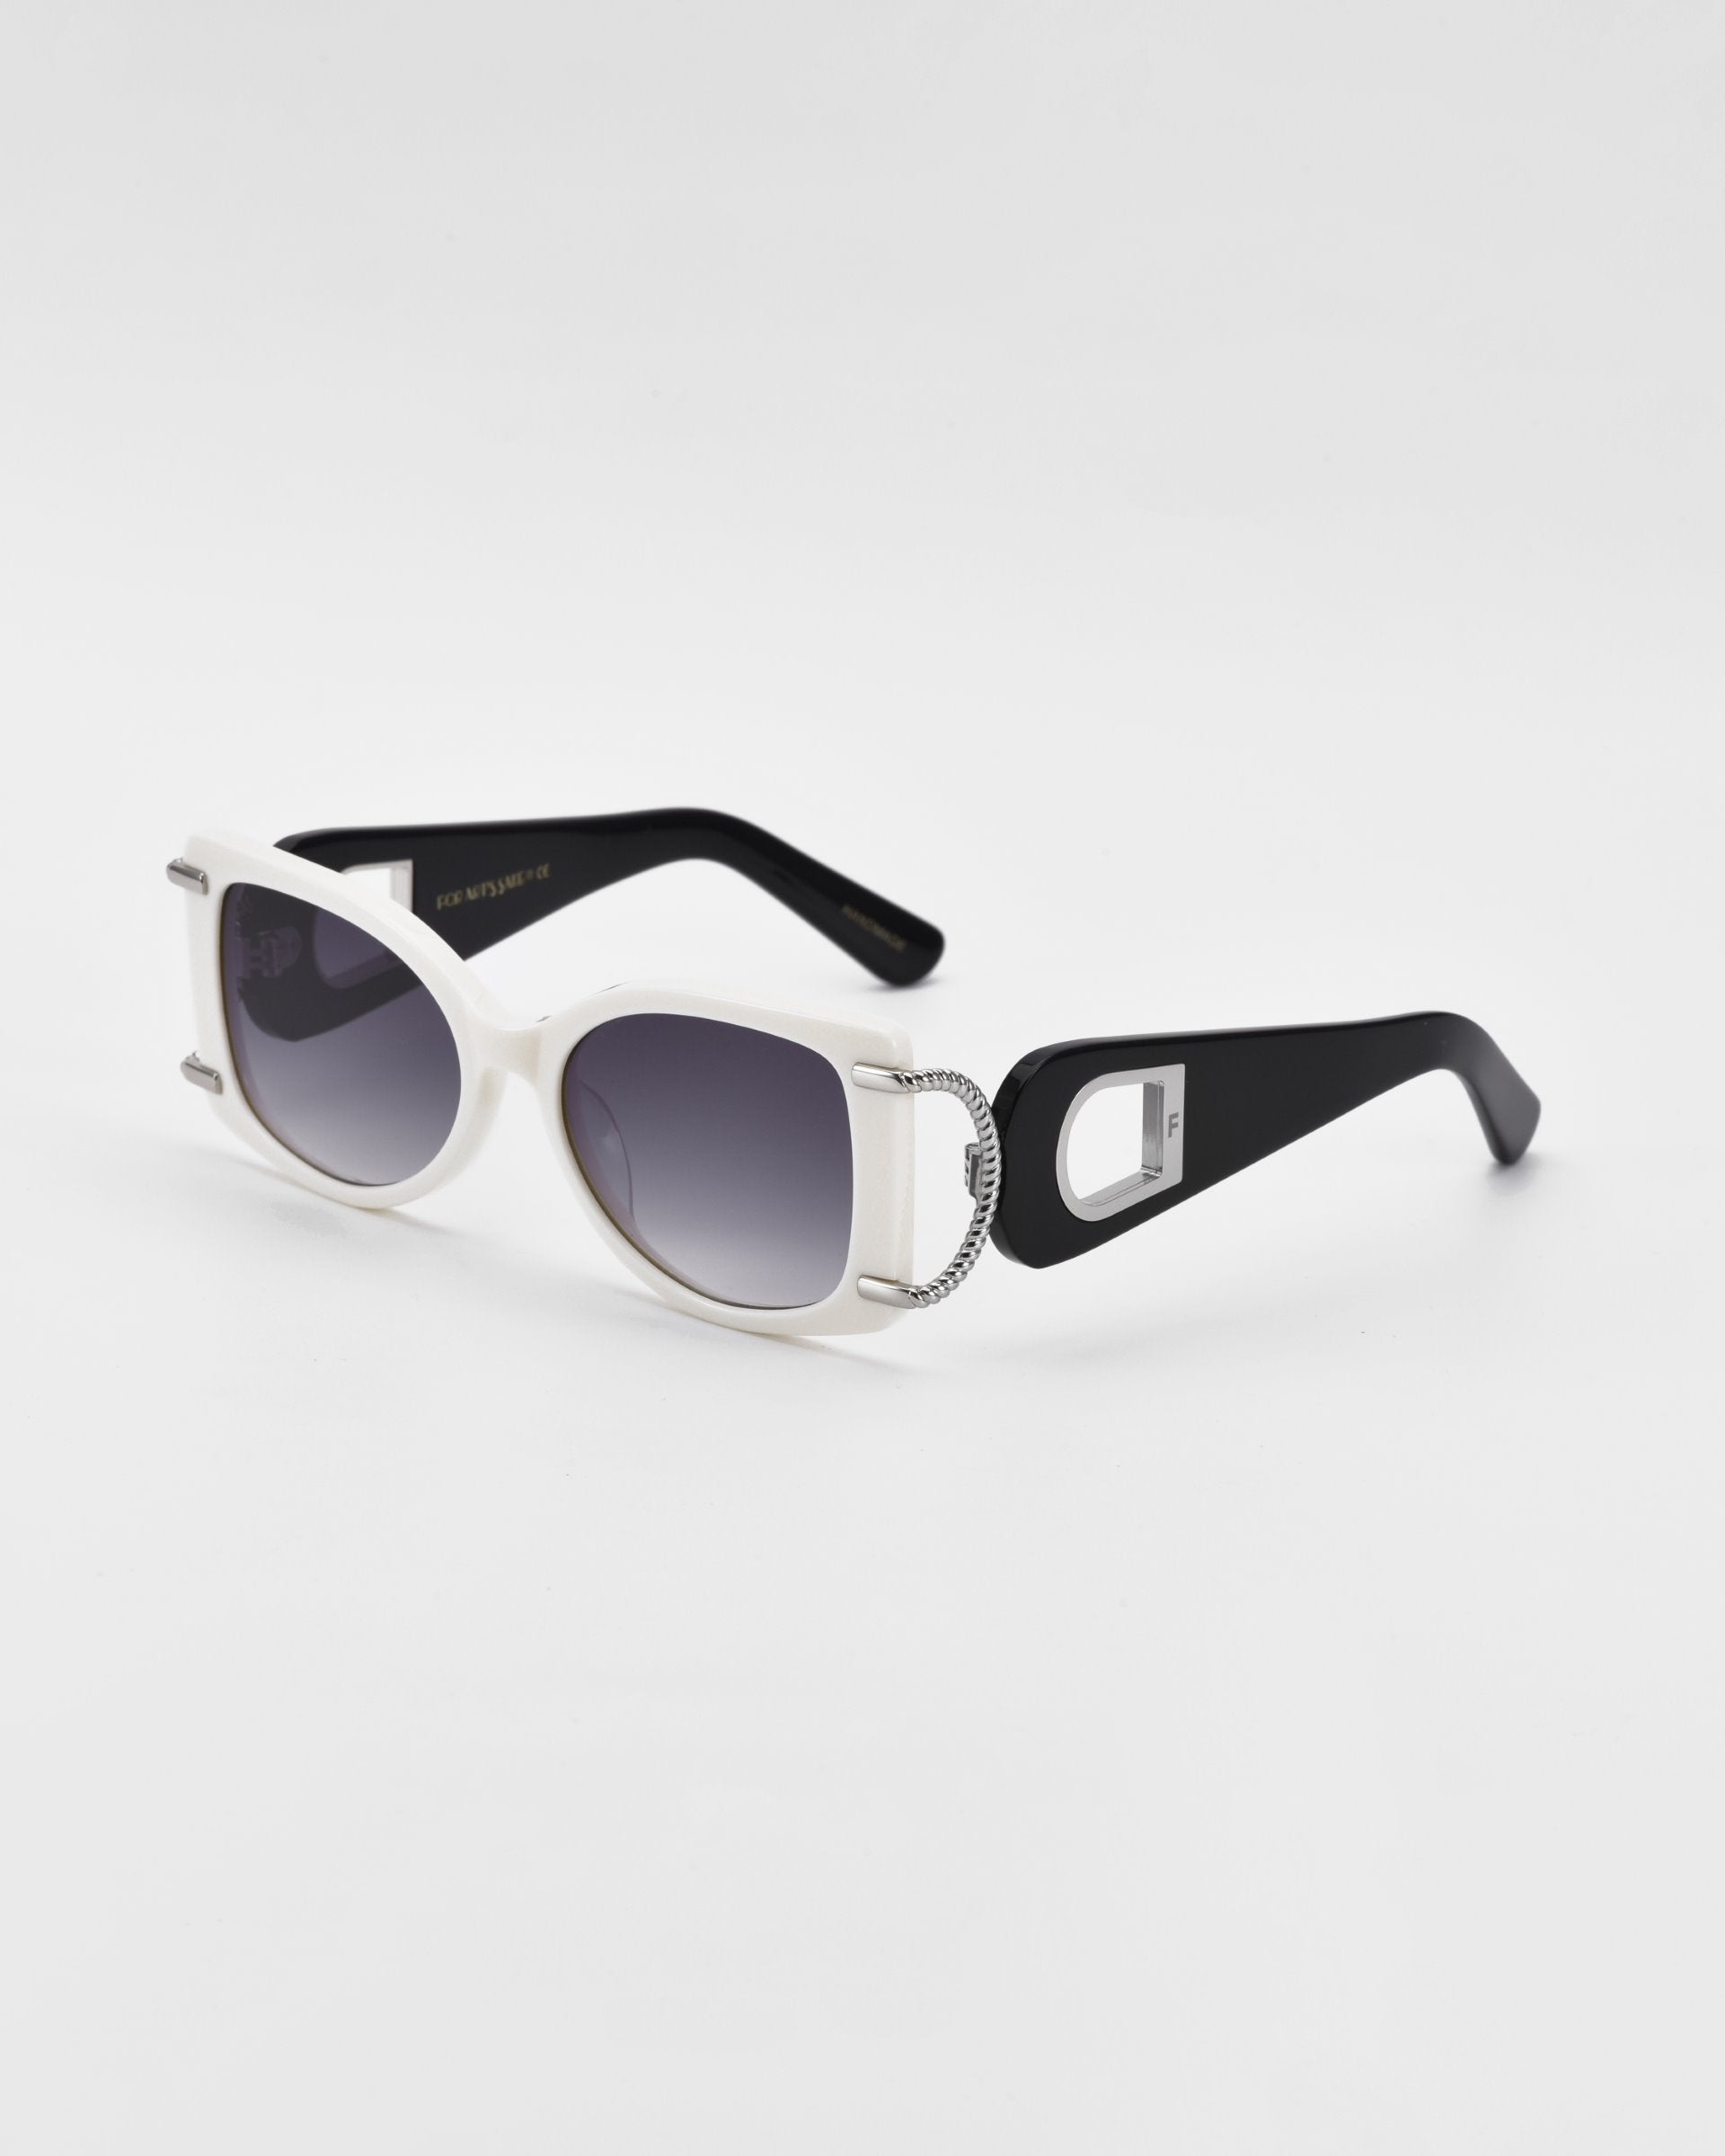 A pair of stylish white acetate For Art&#39;s Sake® Sculpture sunglasses with dark tinted lenses. The thick black temples feature a decorative silver hoop with an 18-karat gold-plated clasp detail at the hinge, providing 100% UVA &amp; UVB protection. The design combines retro and contemporary elements against a plain white background.